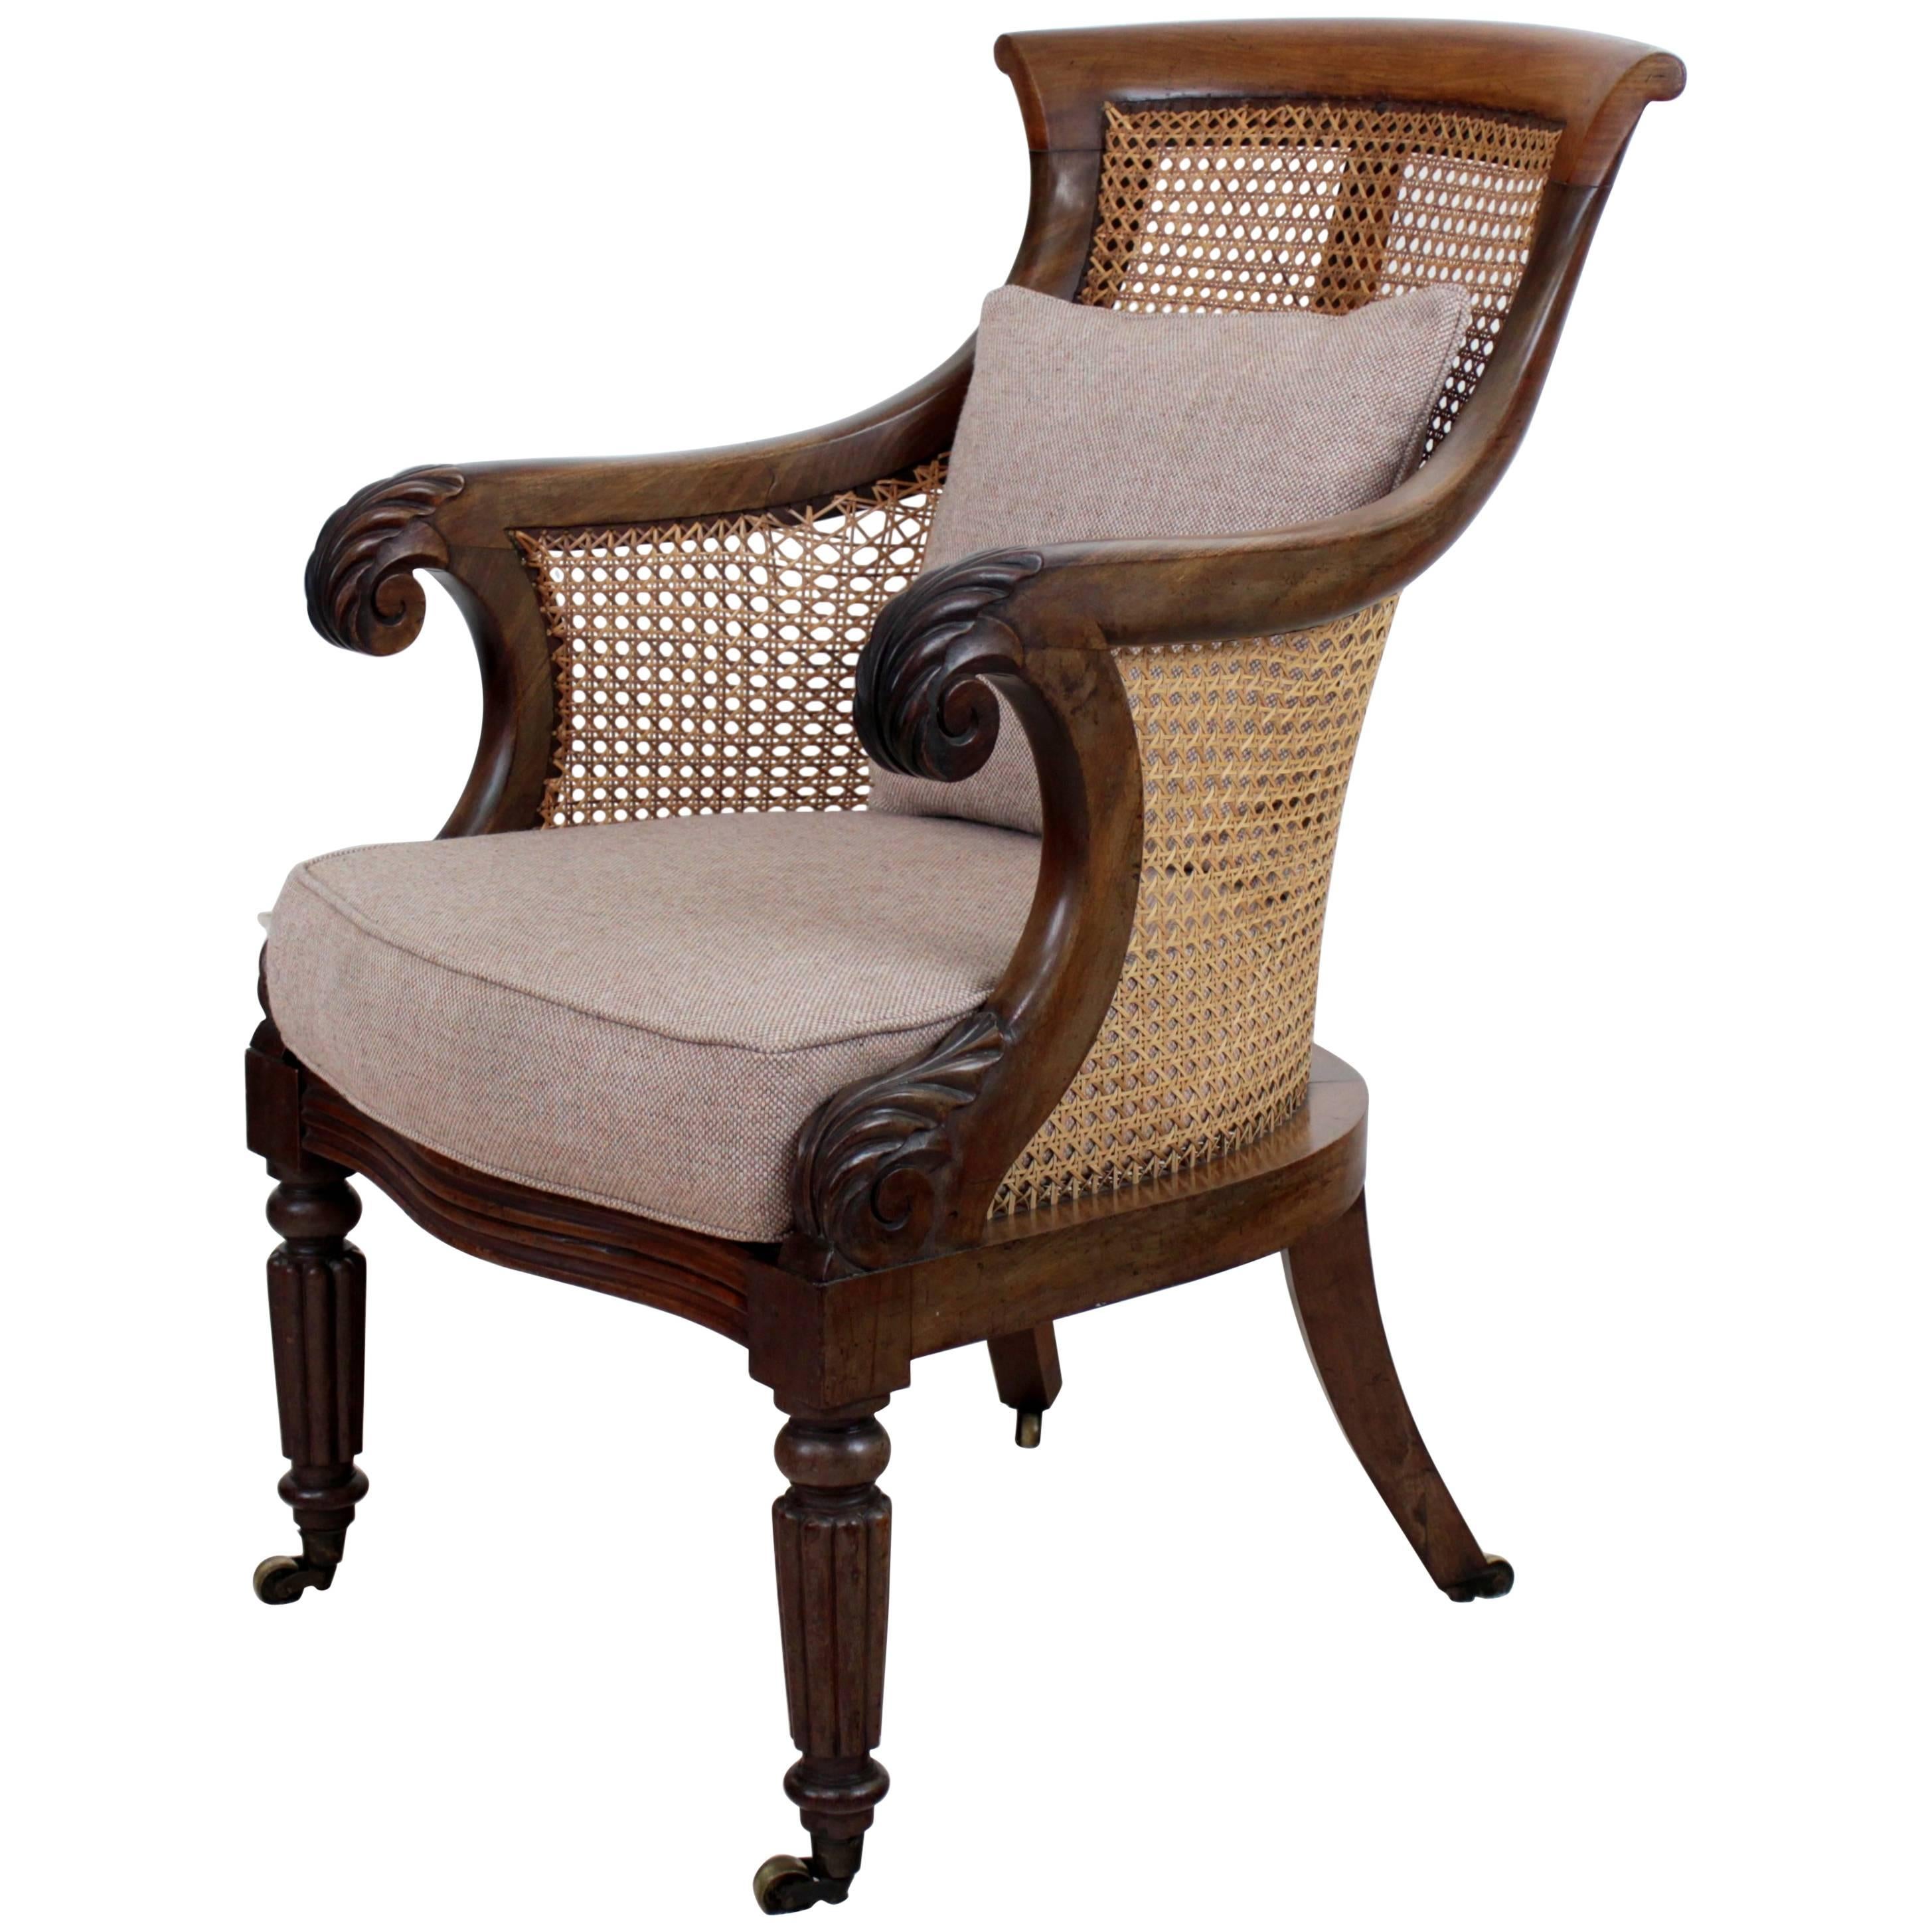 Regency Mahogany and Cane Filled English Library or Bergère Chair